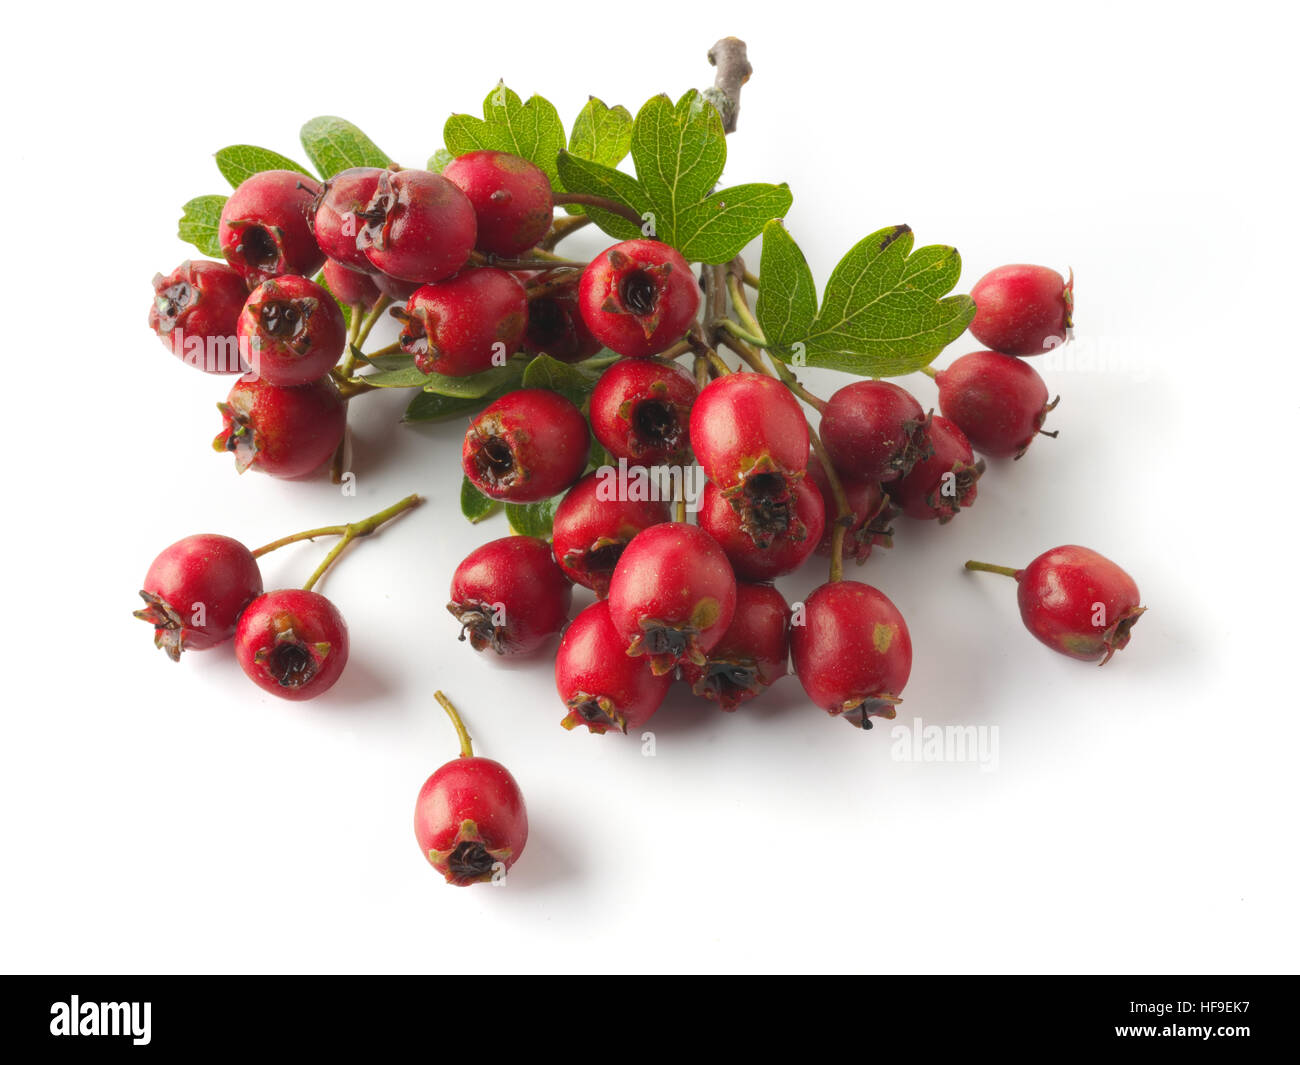 May-tree, whitethorn, or hawberry (Crataegus sp.), fresh berries and foliage on wooden planks against white background Stock Photo